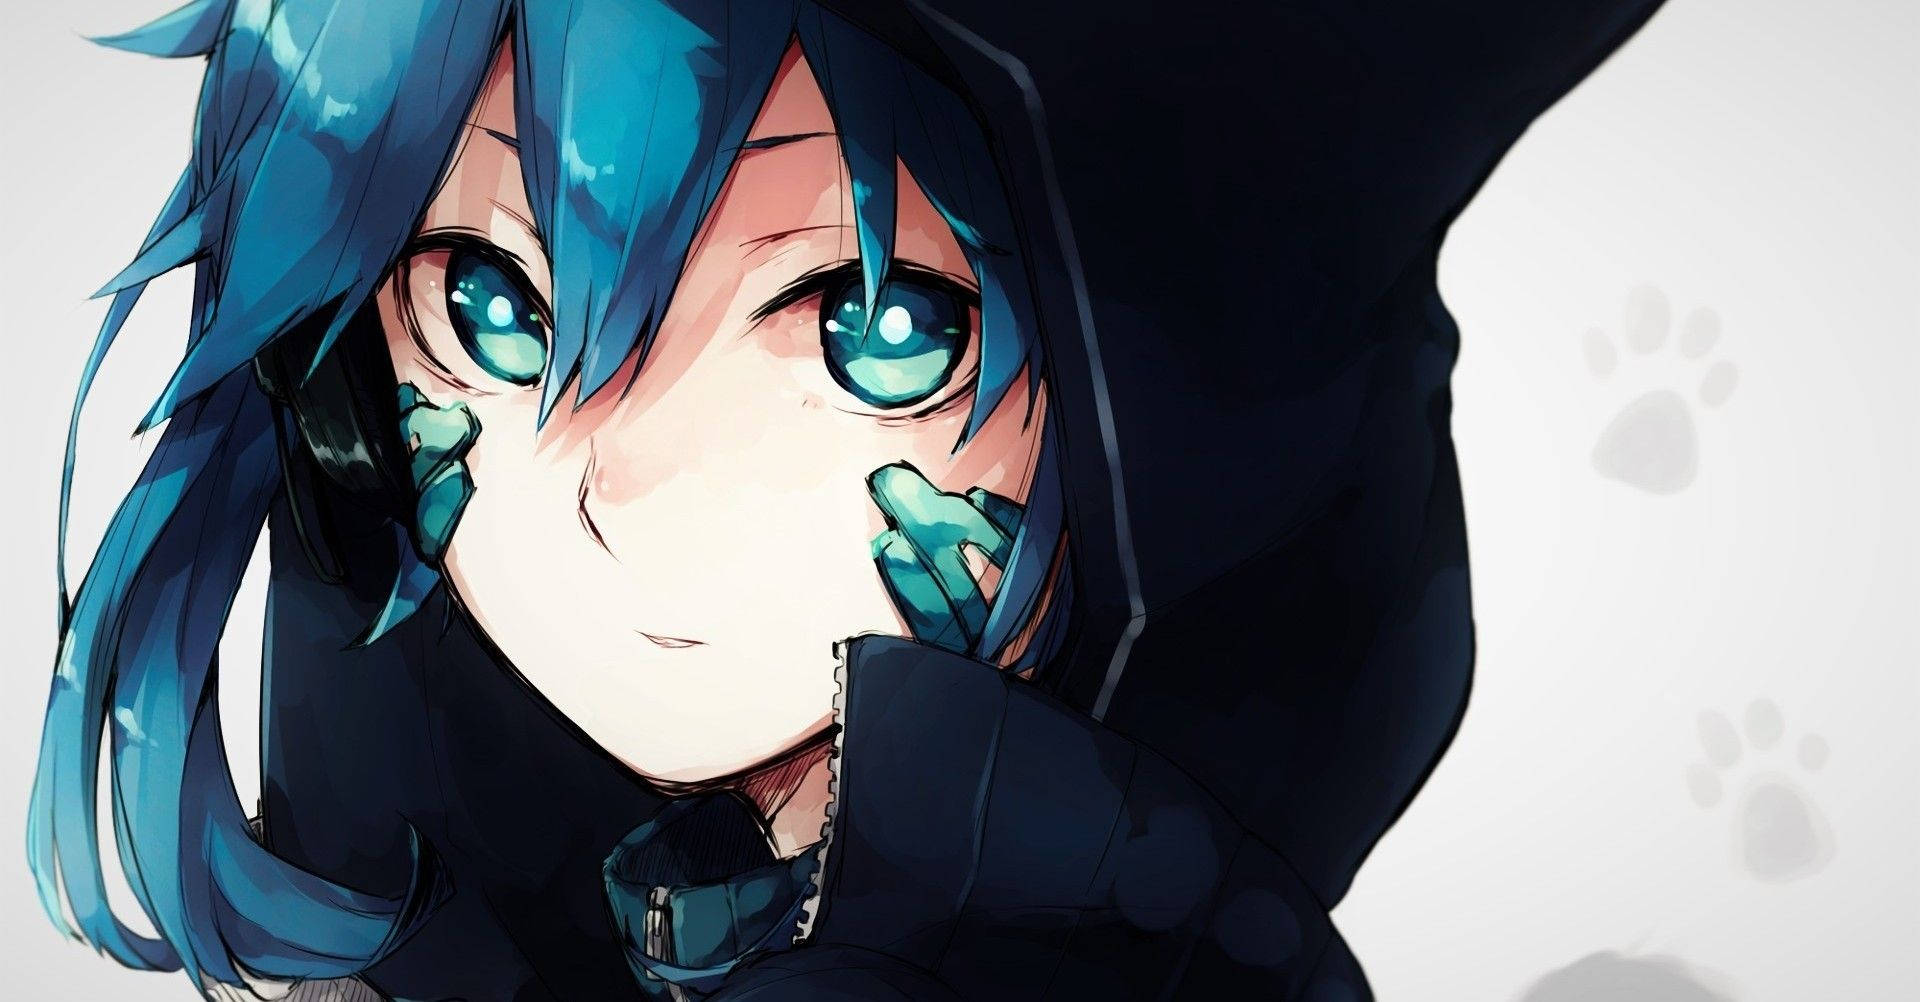 Tomboy Anime Girl With Blue Hair Wallpaper